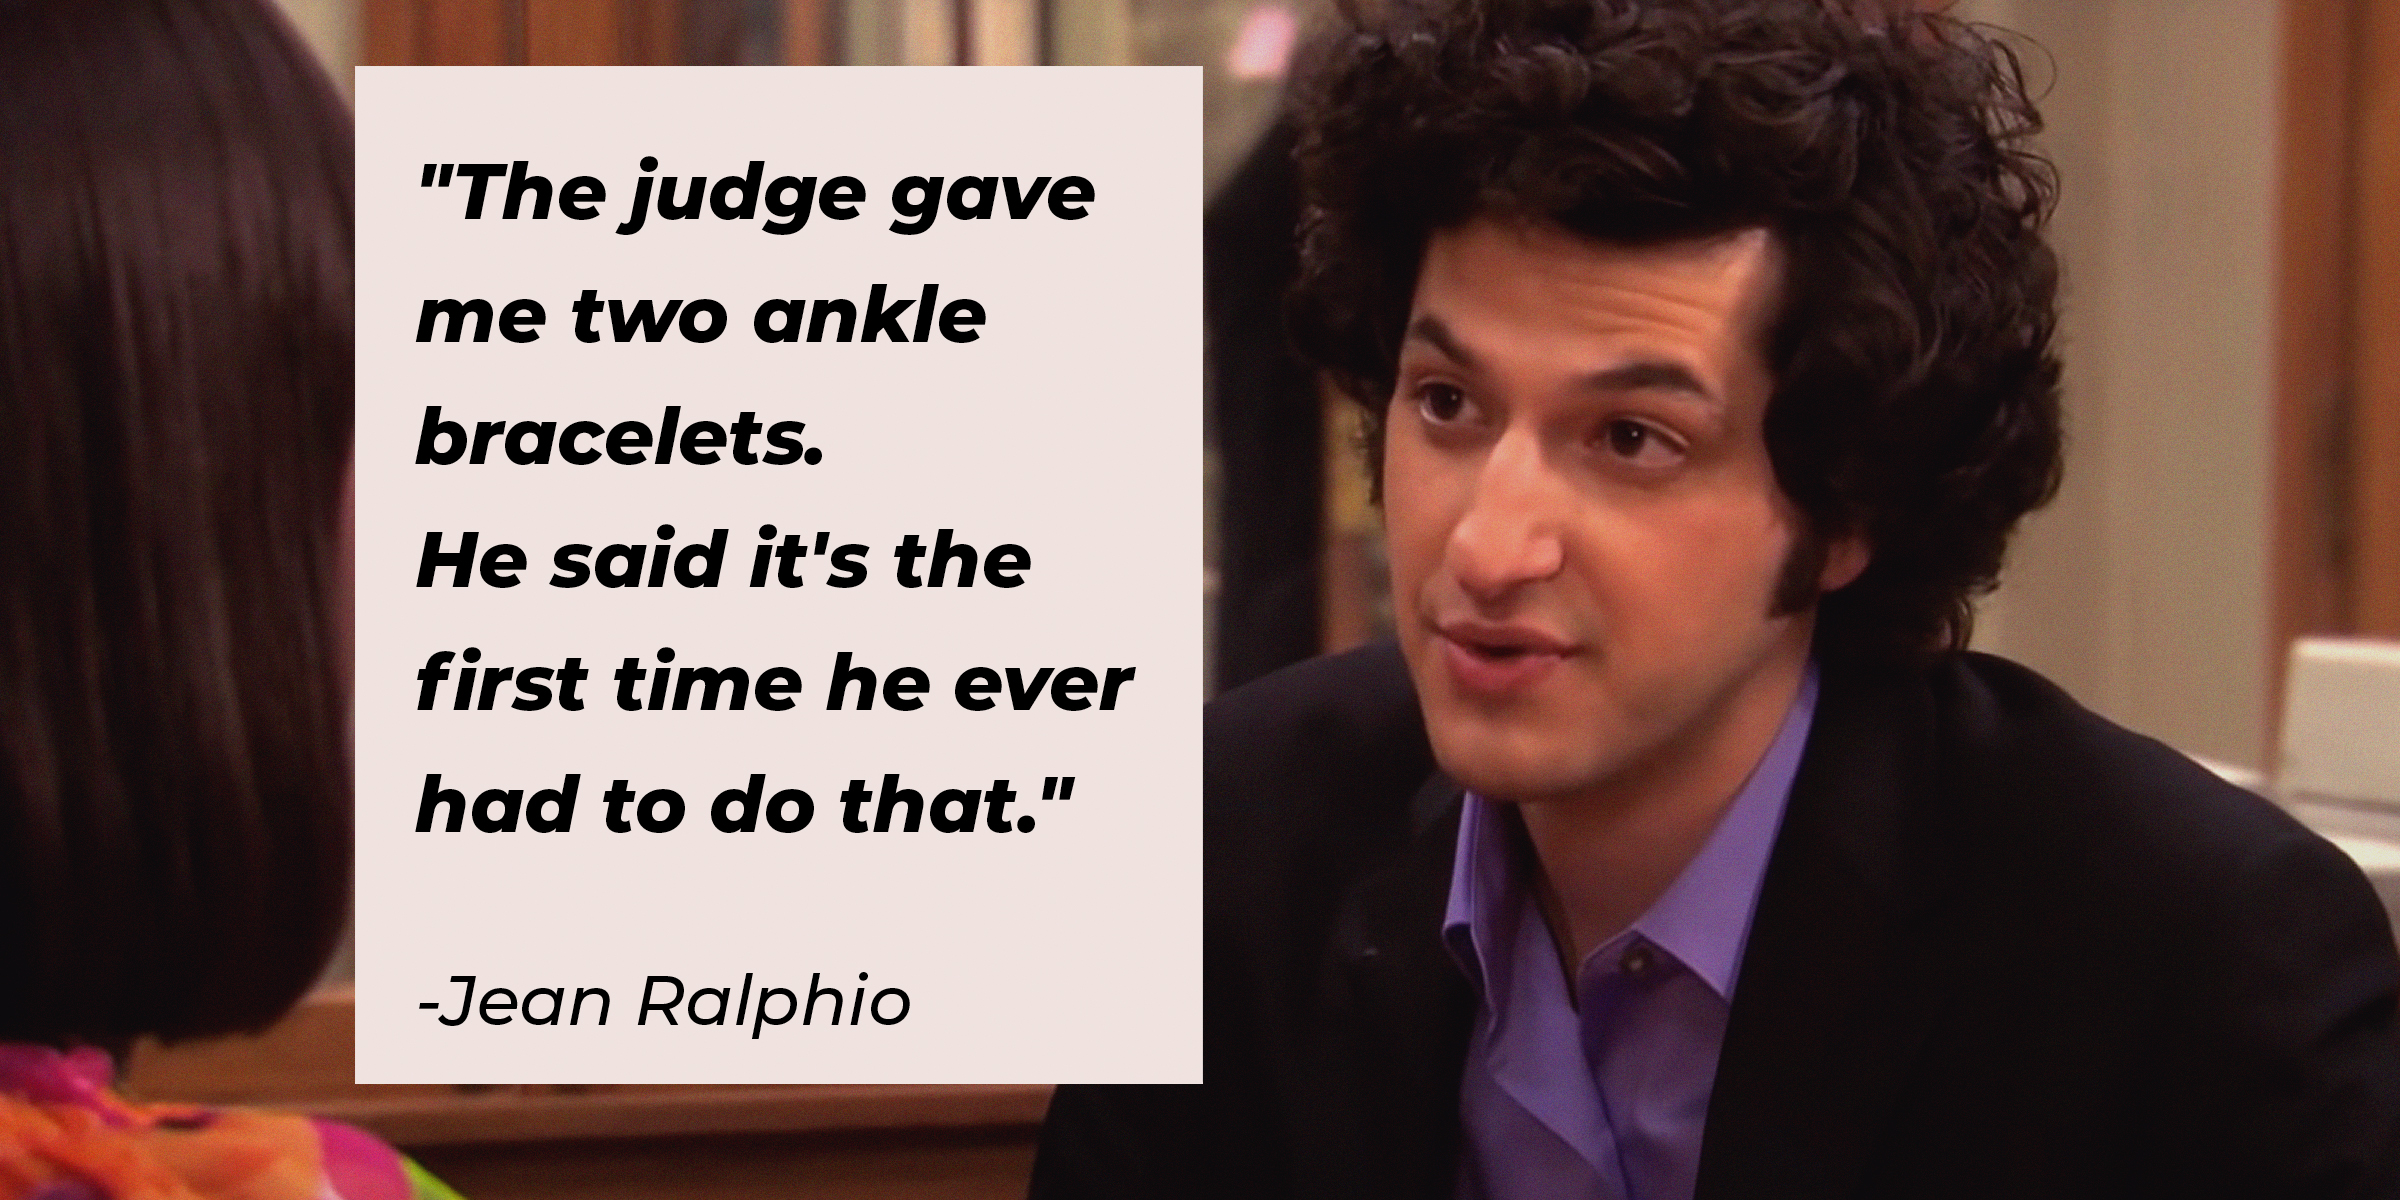 Photo of Jean-Ralphio Saperstein with the quote: "The judge gave me two ankle bracelets. He said it’s the first time he ever had to do that." | Source: Facebook.com/parksandrecreation